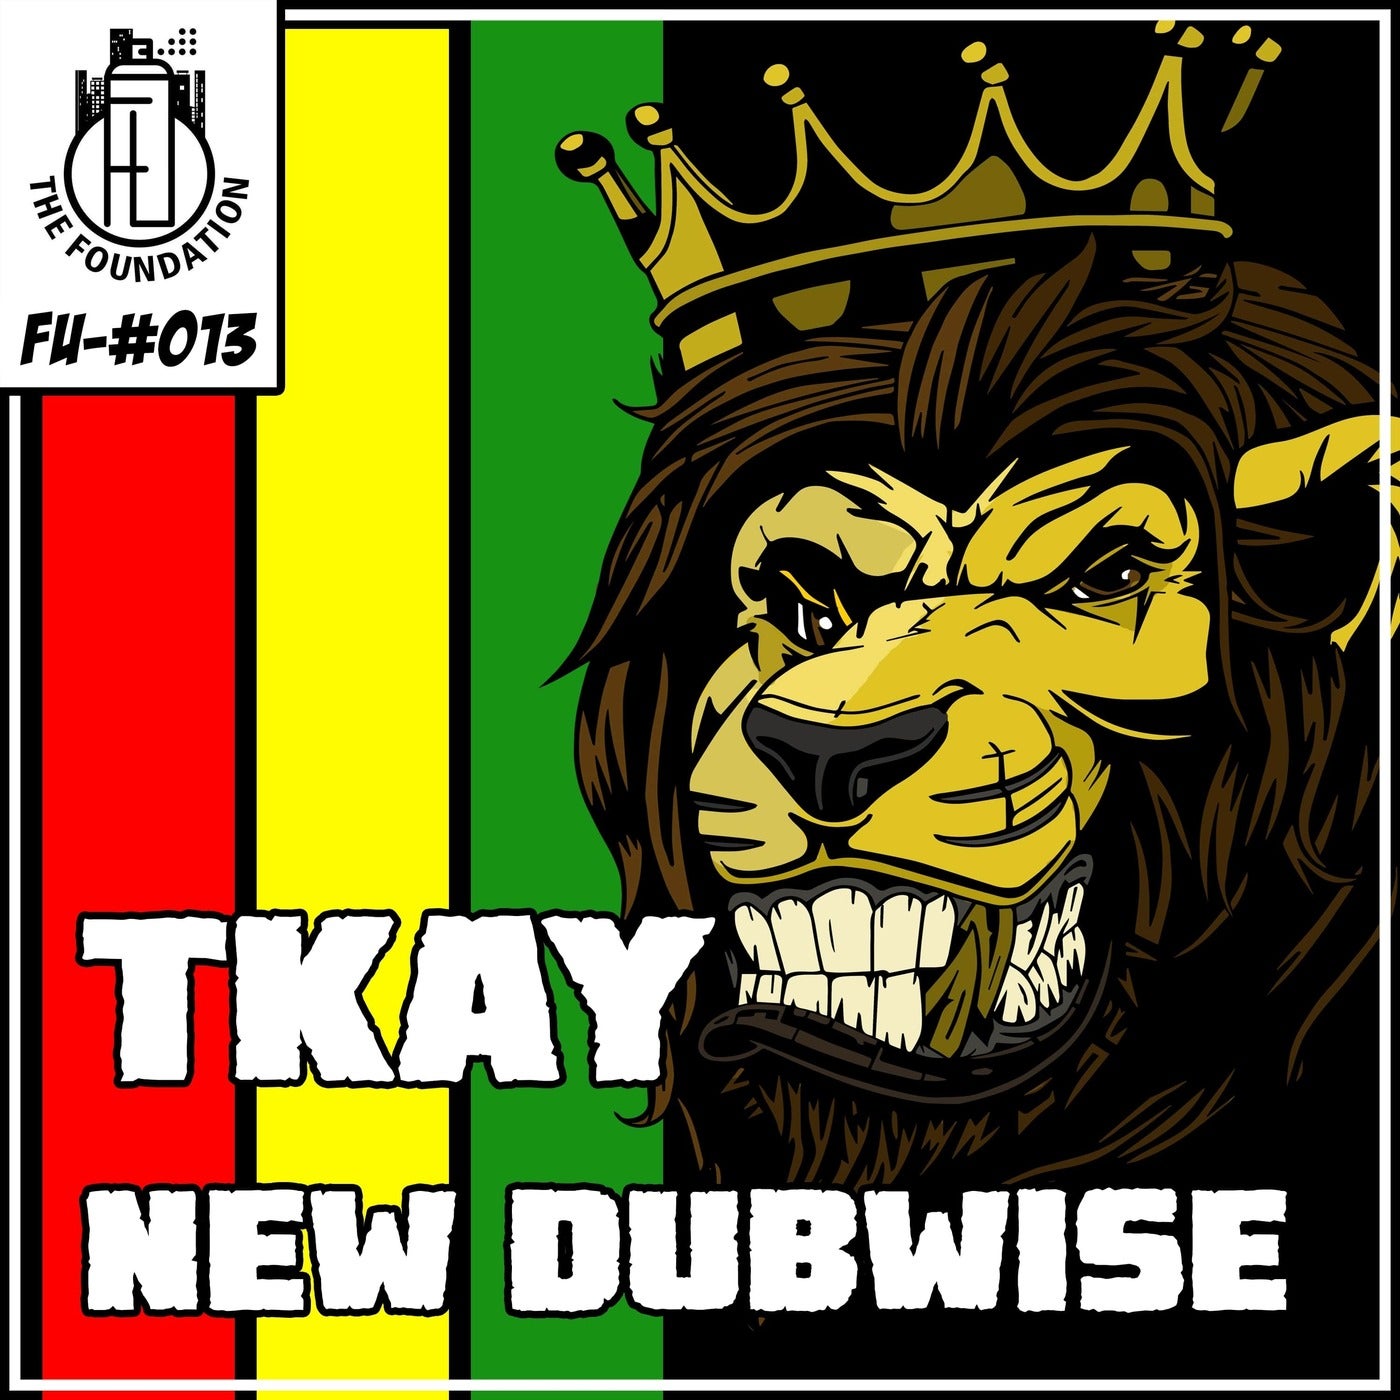 New Dubwise